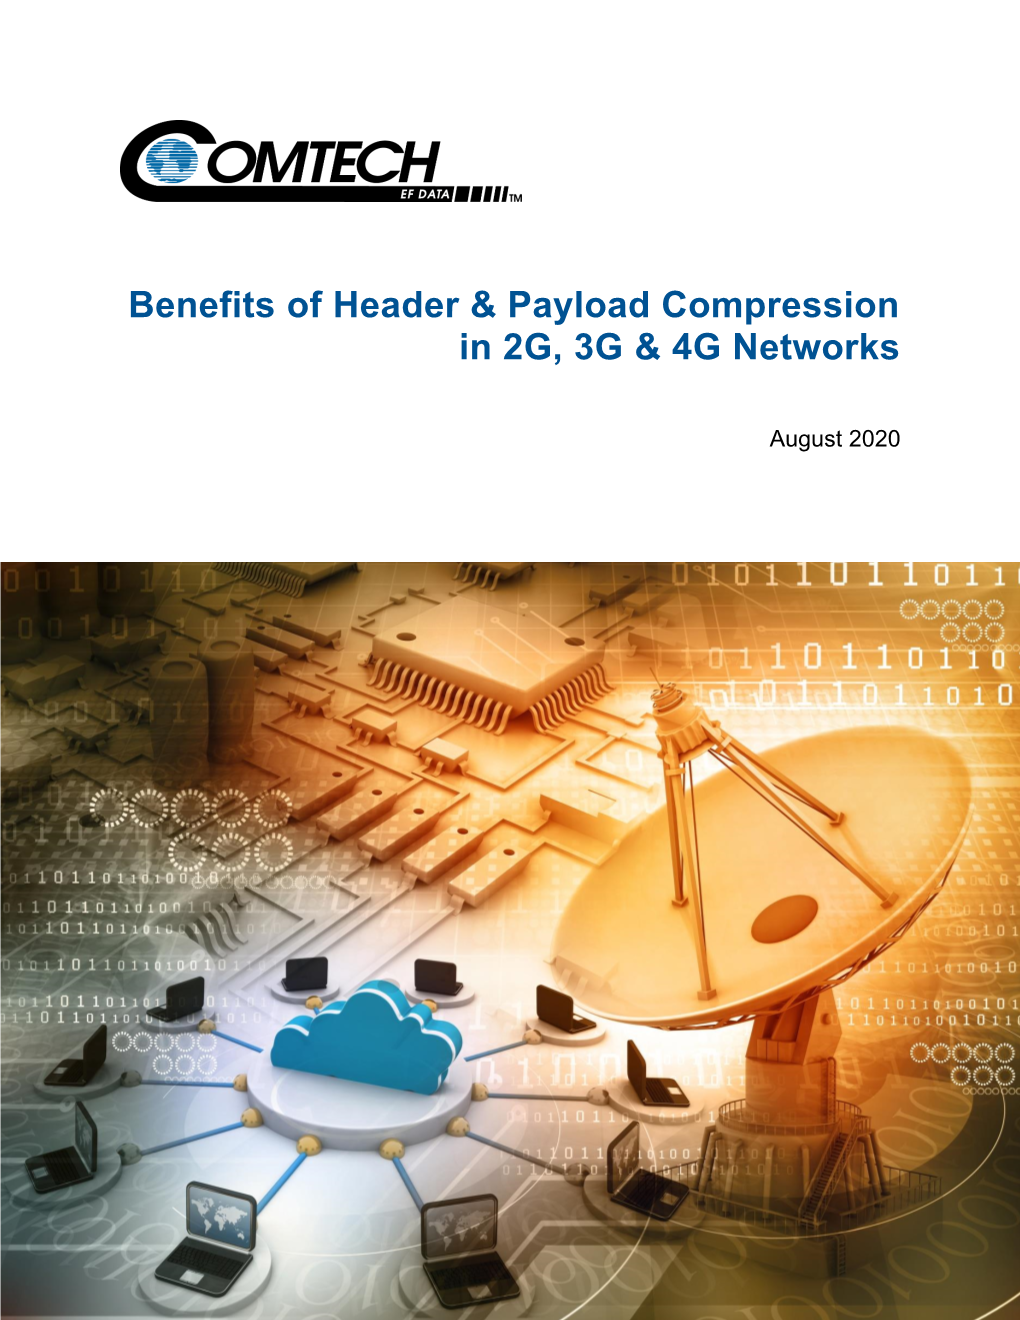 Benefits of Header & Payload Compression in 2G, 3G and & 4G Networks